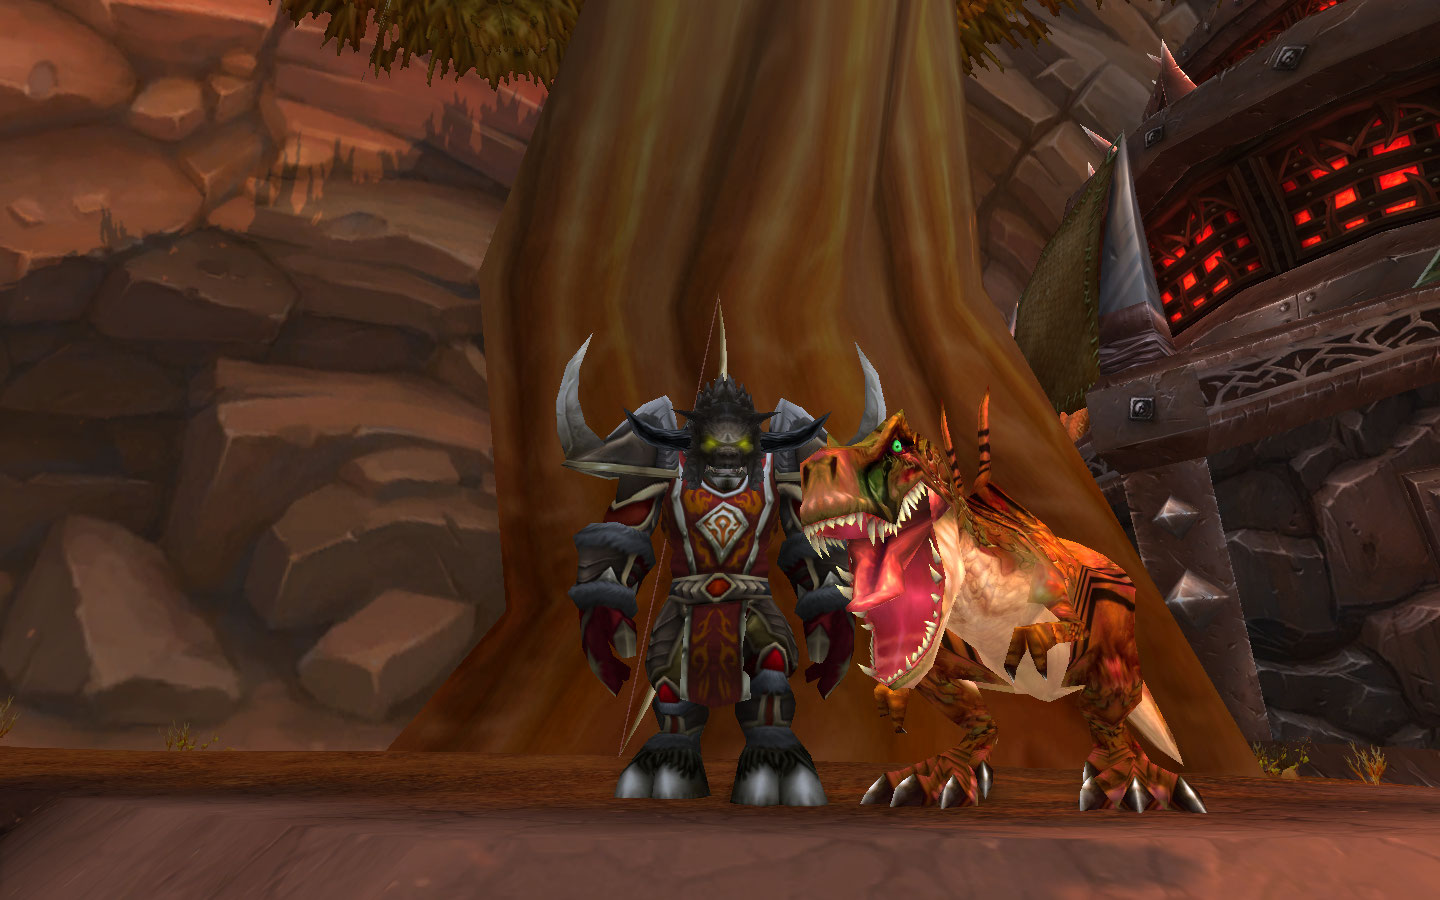 Me and Cretaceo at our favorite hangout in Orgrimmar, just chilling after a good day of grinding. Always and Forever, buddy. Always and Forever.